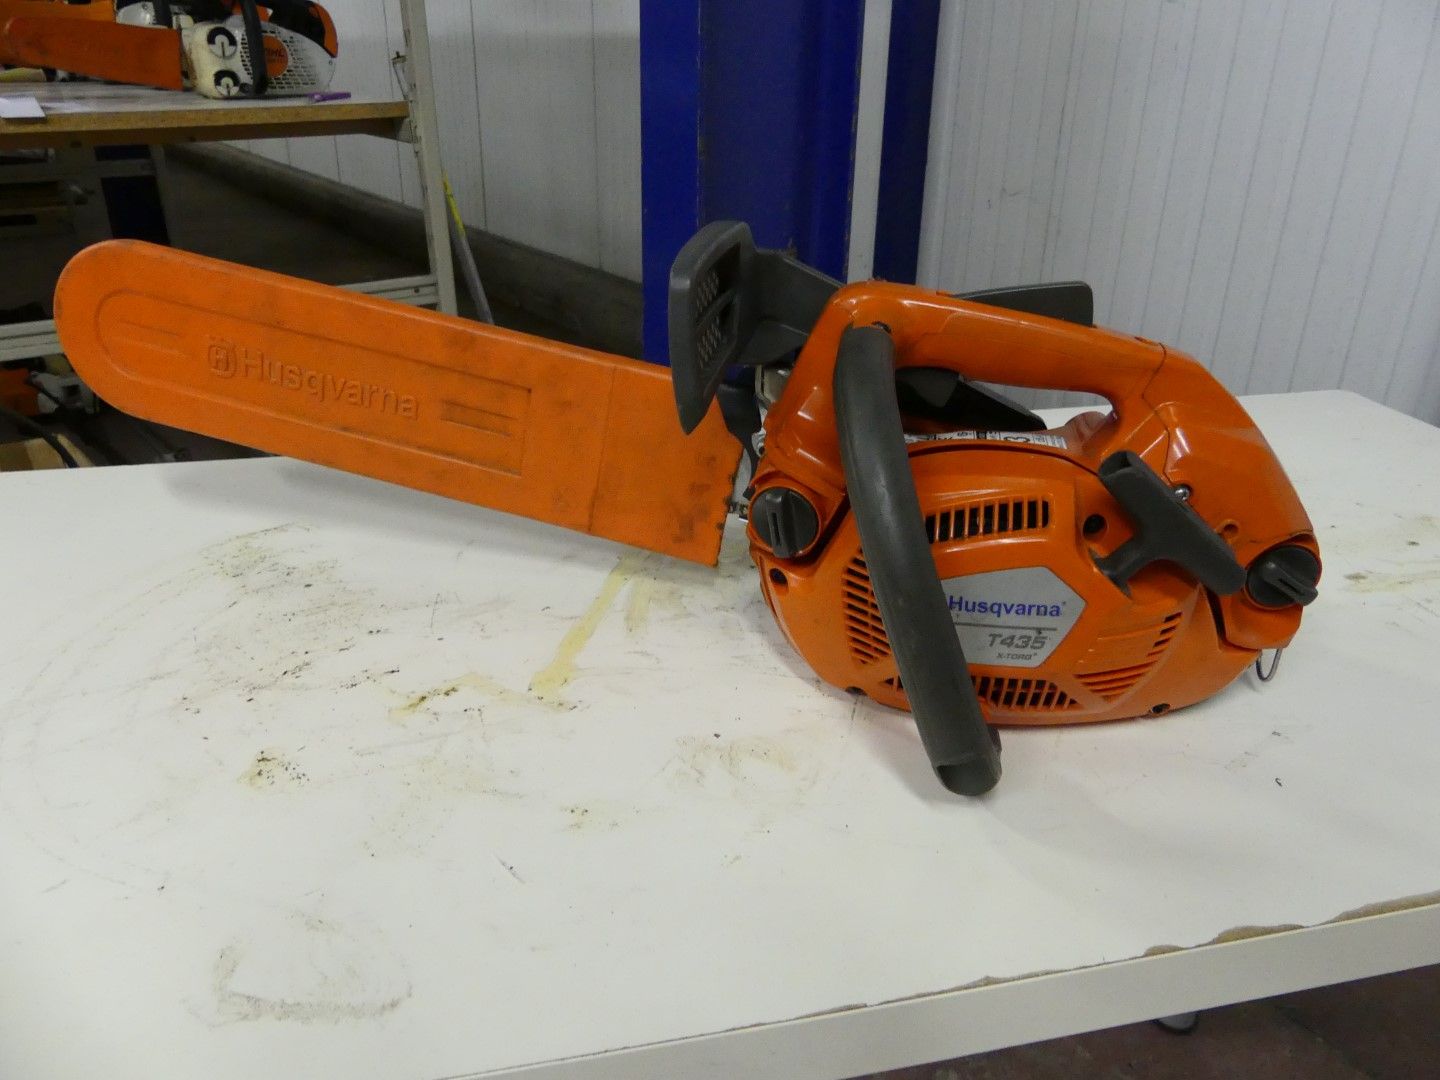 Null HUSQVARNA T435 THERMAL CHAINSAW

YEAR 2015